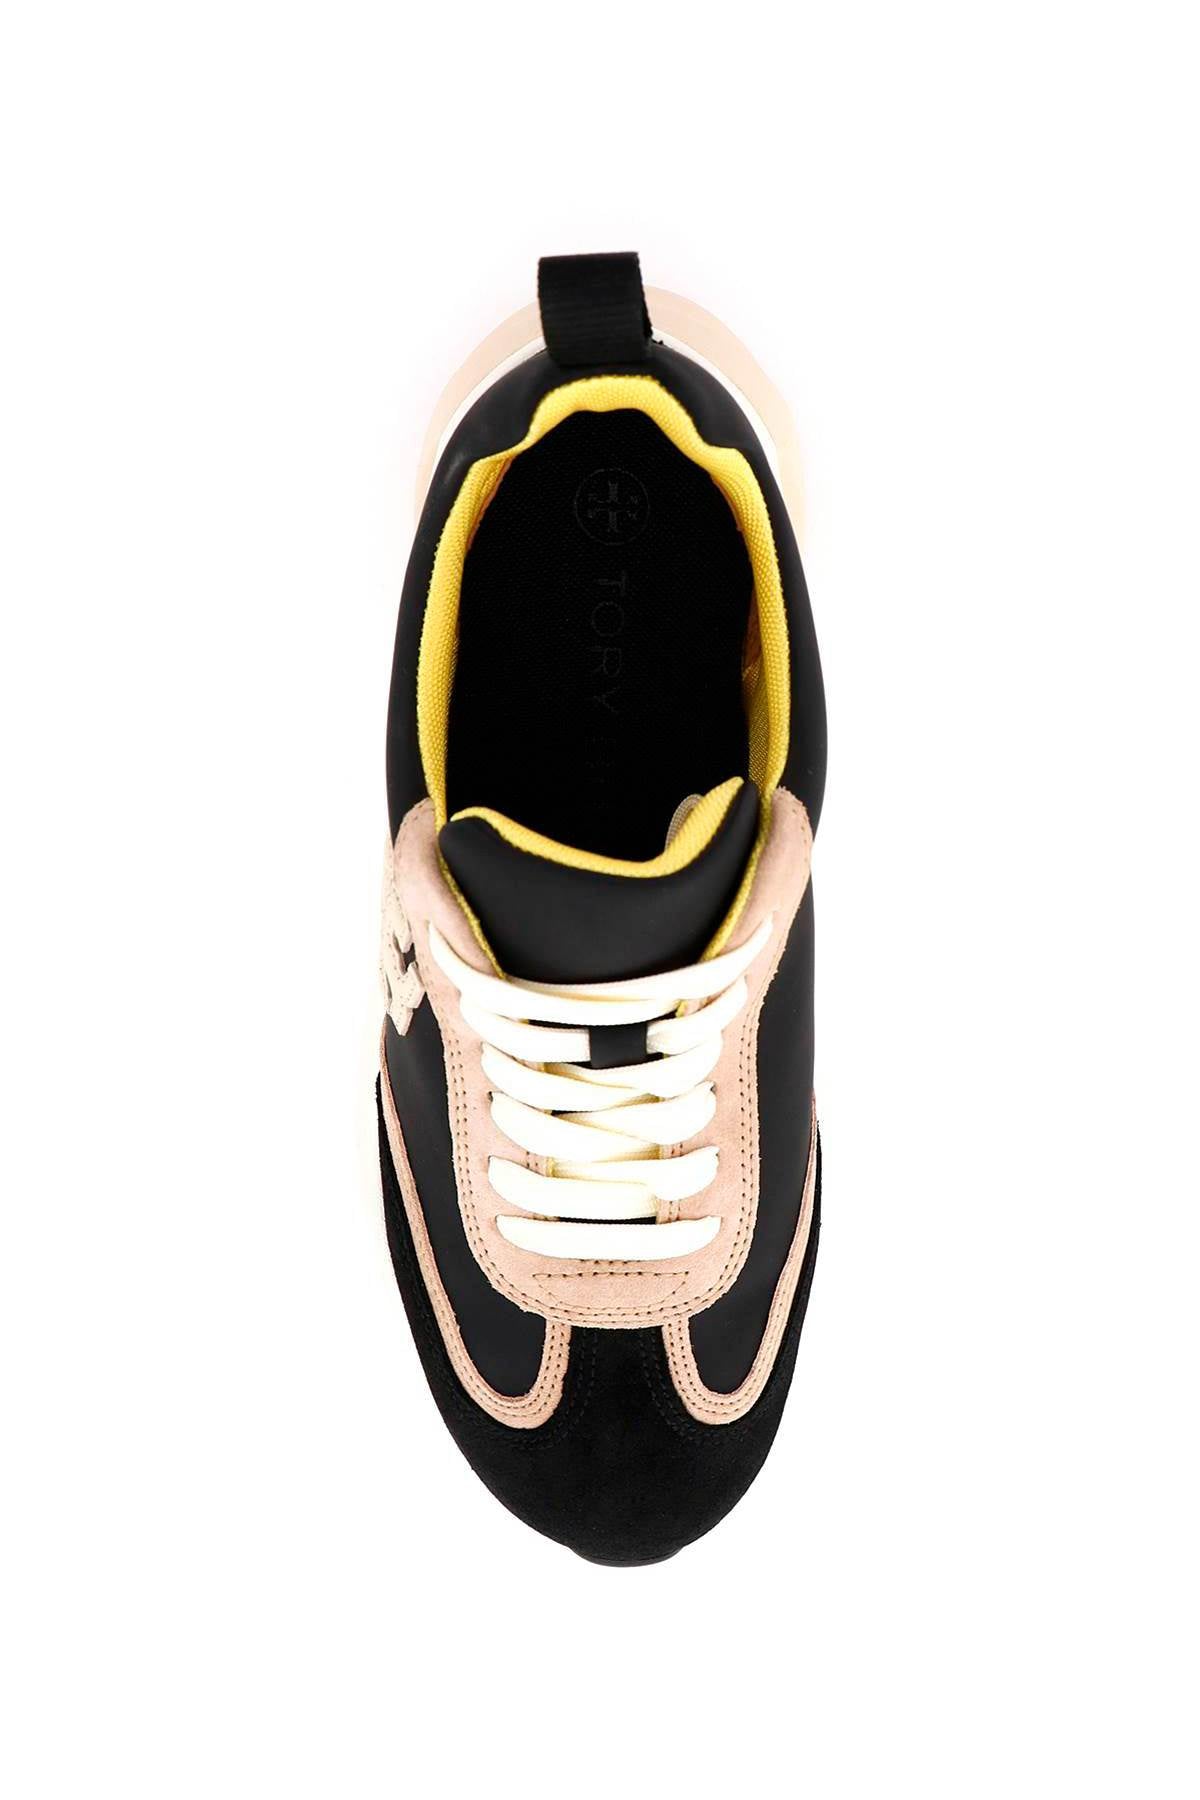 Tory burch good luck sneakers-1